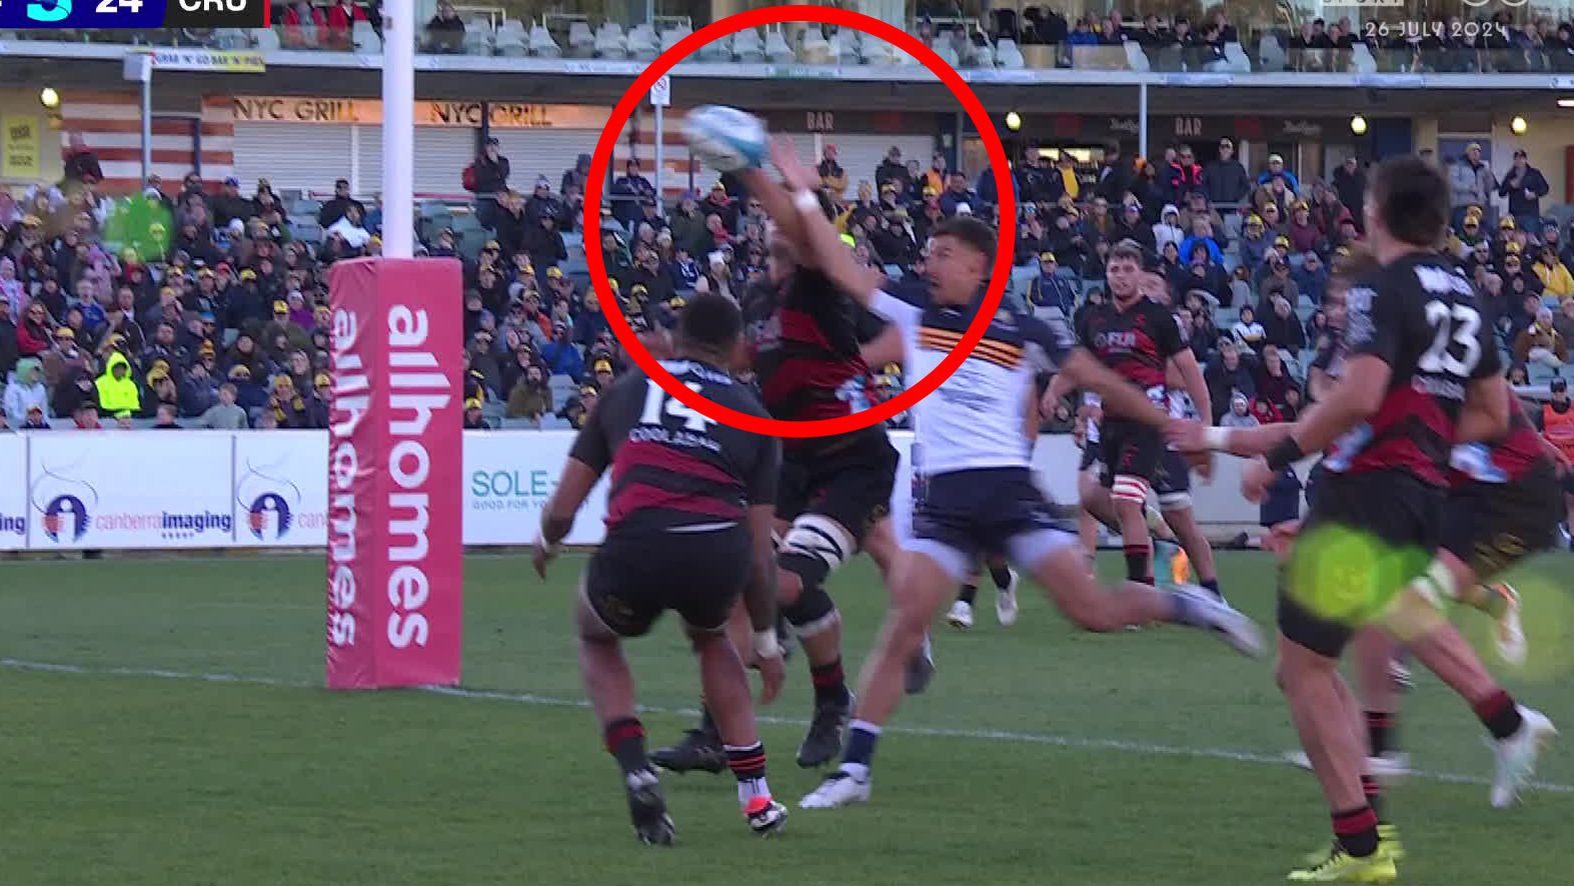 Crusaders player Quinten Strange purposely knocks the ball into touch, copping a yellow card and causing the visitors to concede a penalty try.